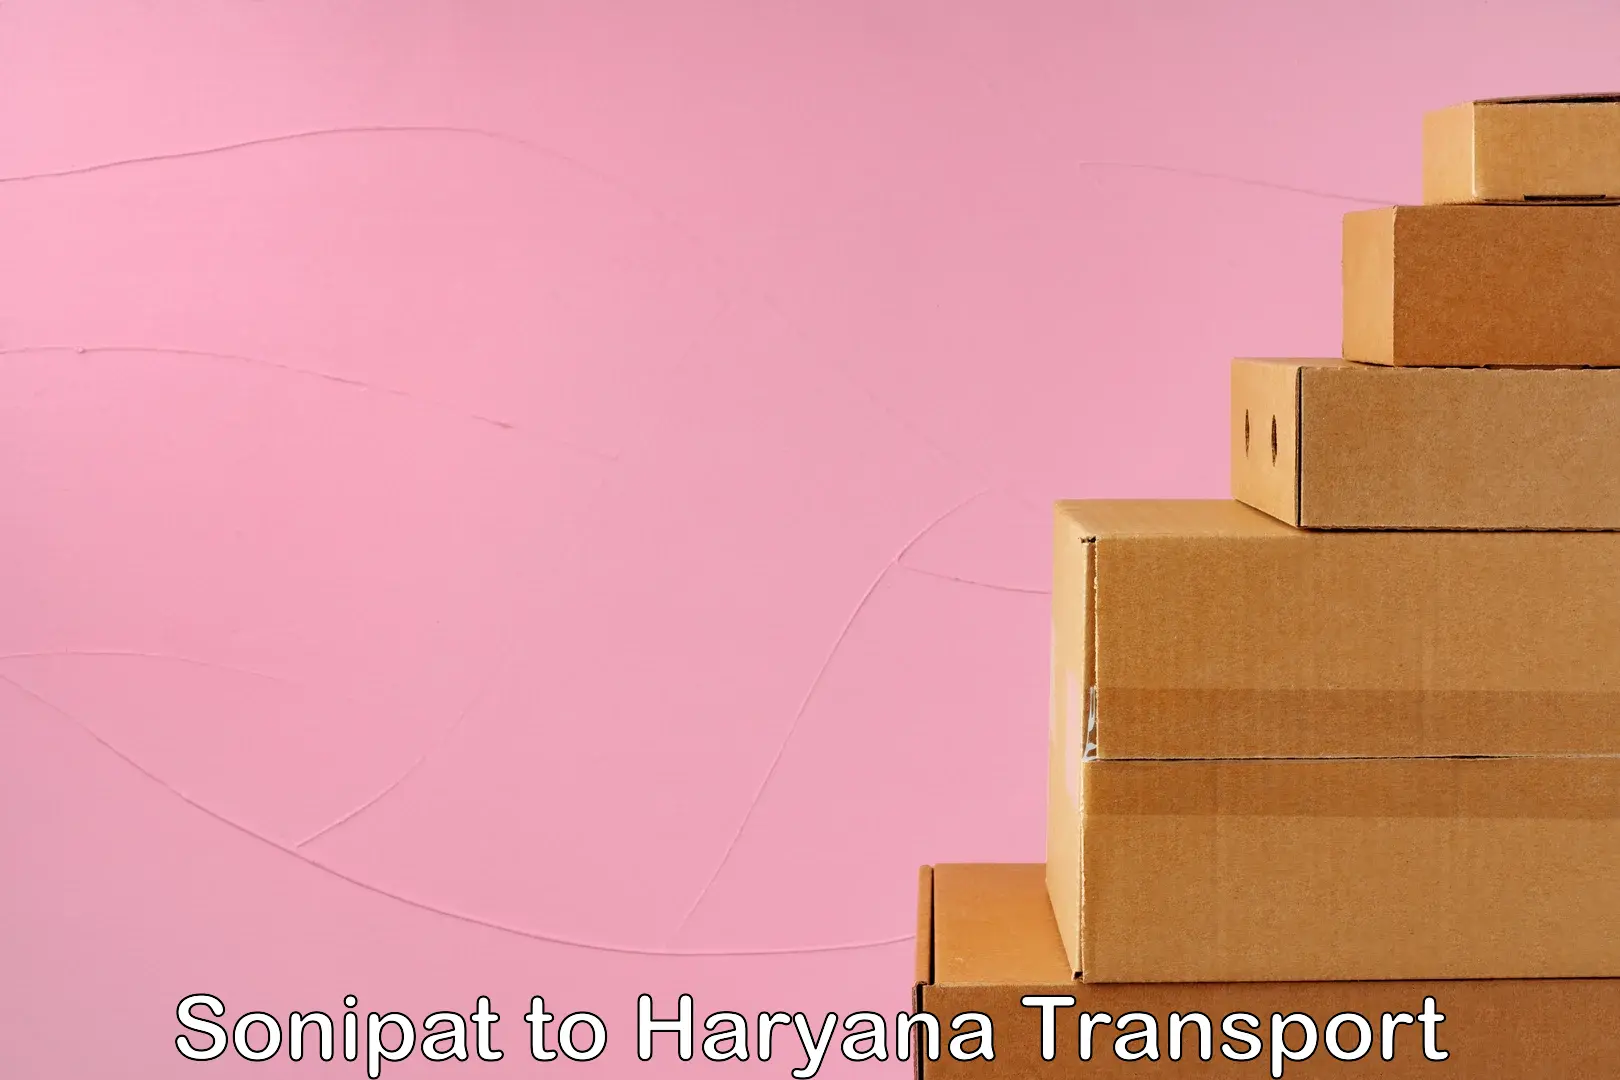 Air freight transport services Sonipat to Haryana